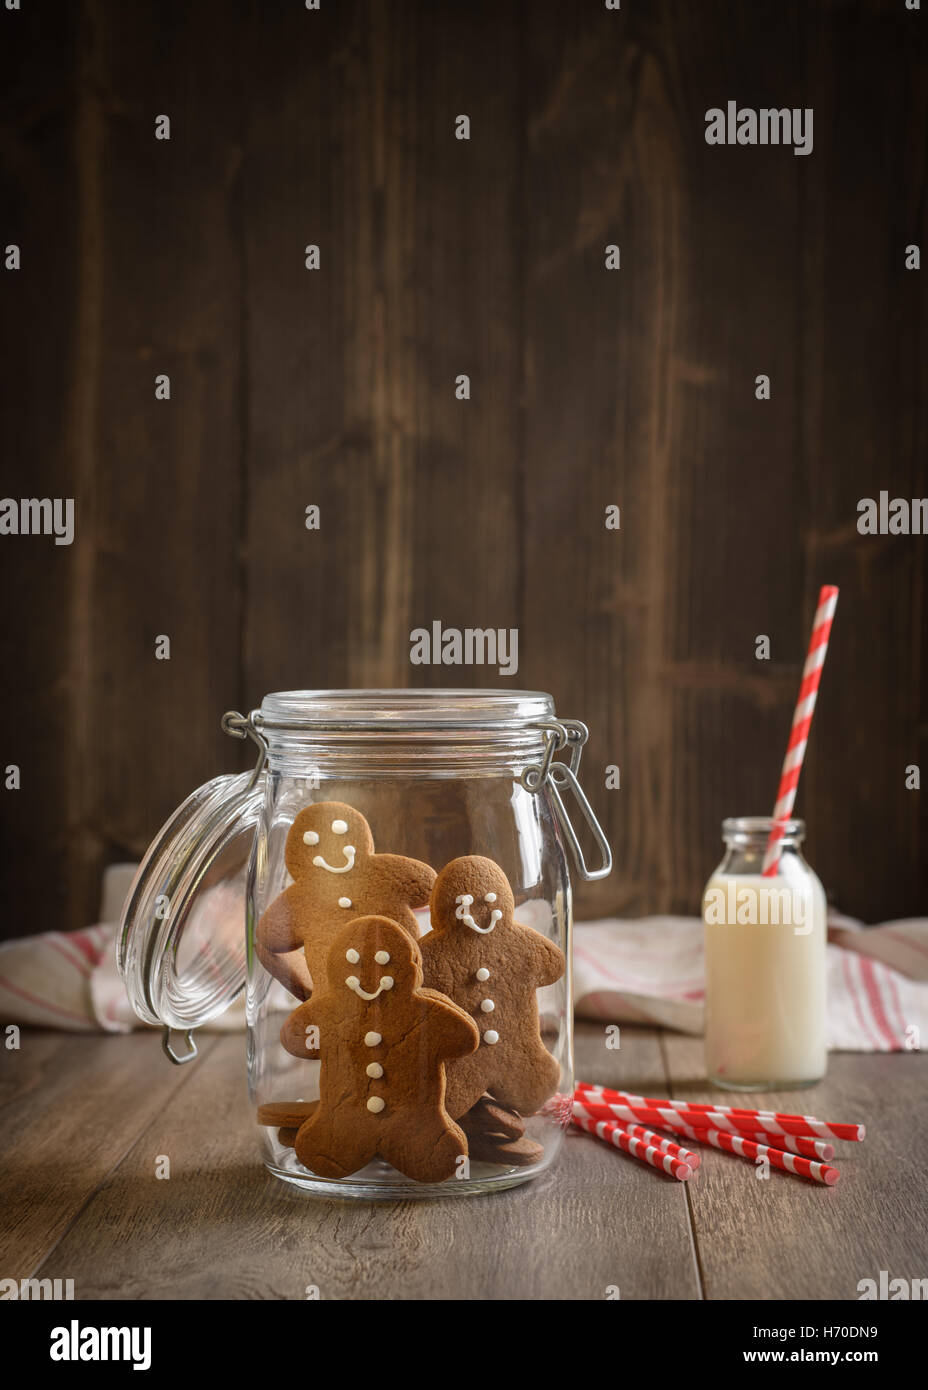 Gingerbread men in cookie jar with milk and straws in the background Stock Photo